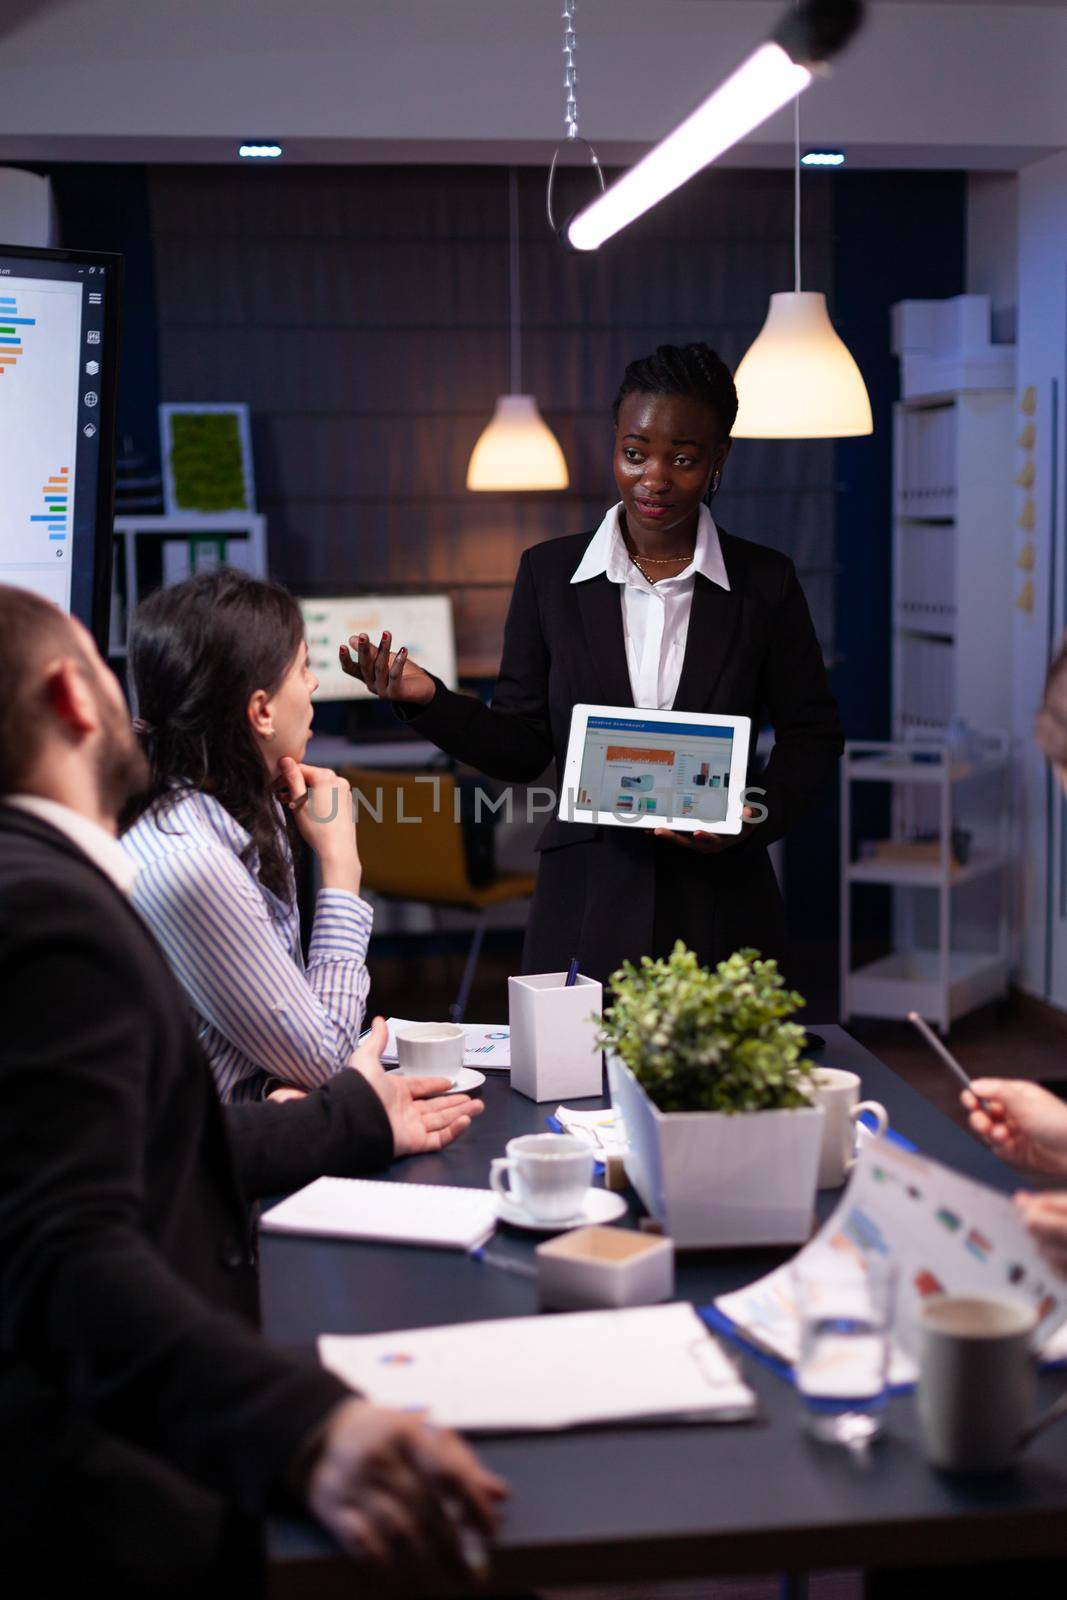 Entrepreneur woman with dark skin overworking in company office meeting room explaining management strategy using tablet. Workaholics multi-ethnic businesspeople brainstorming late at night.